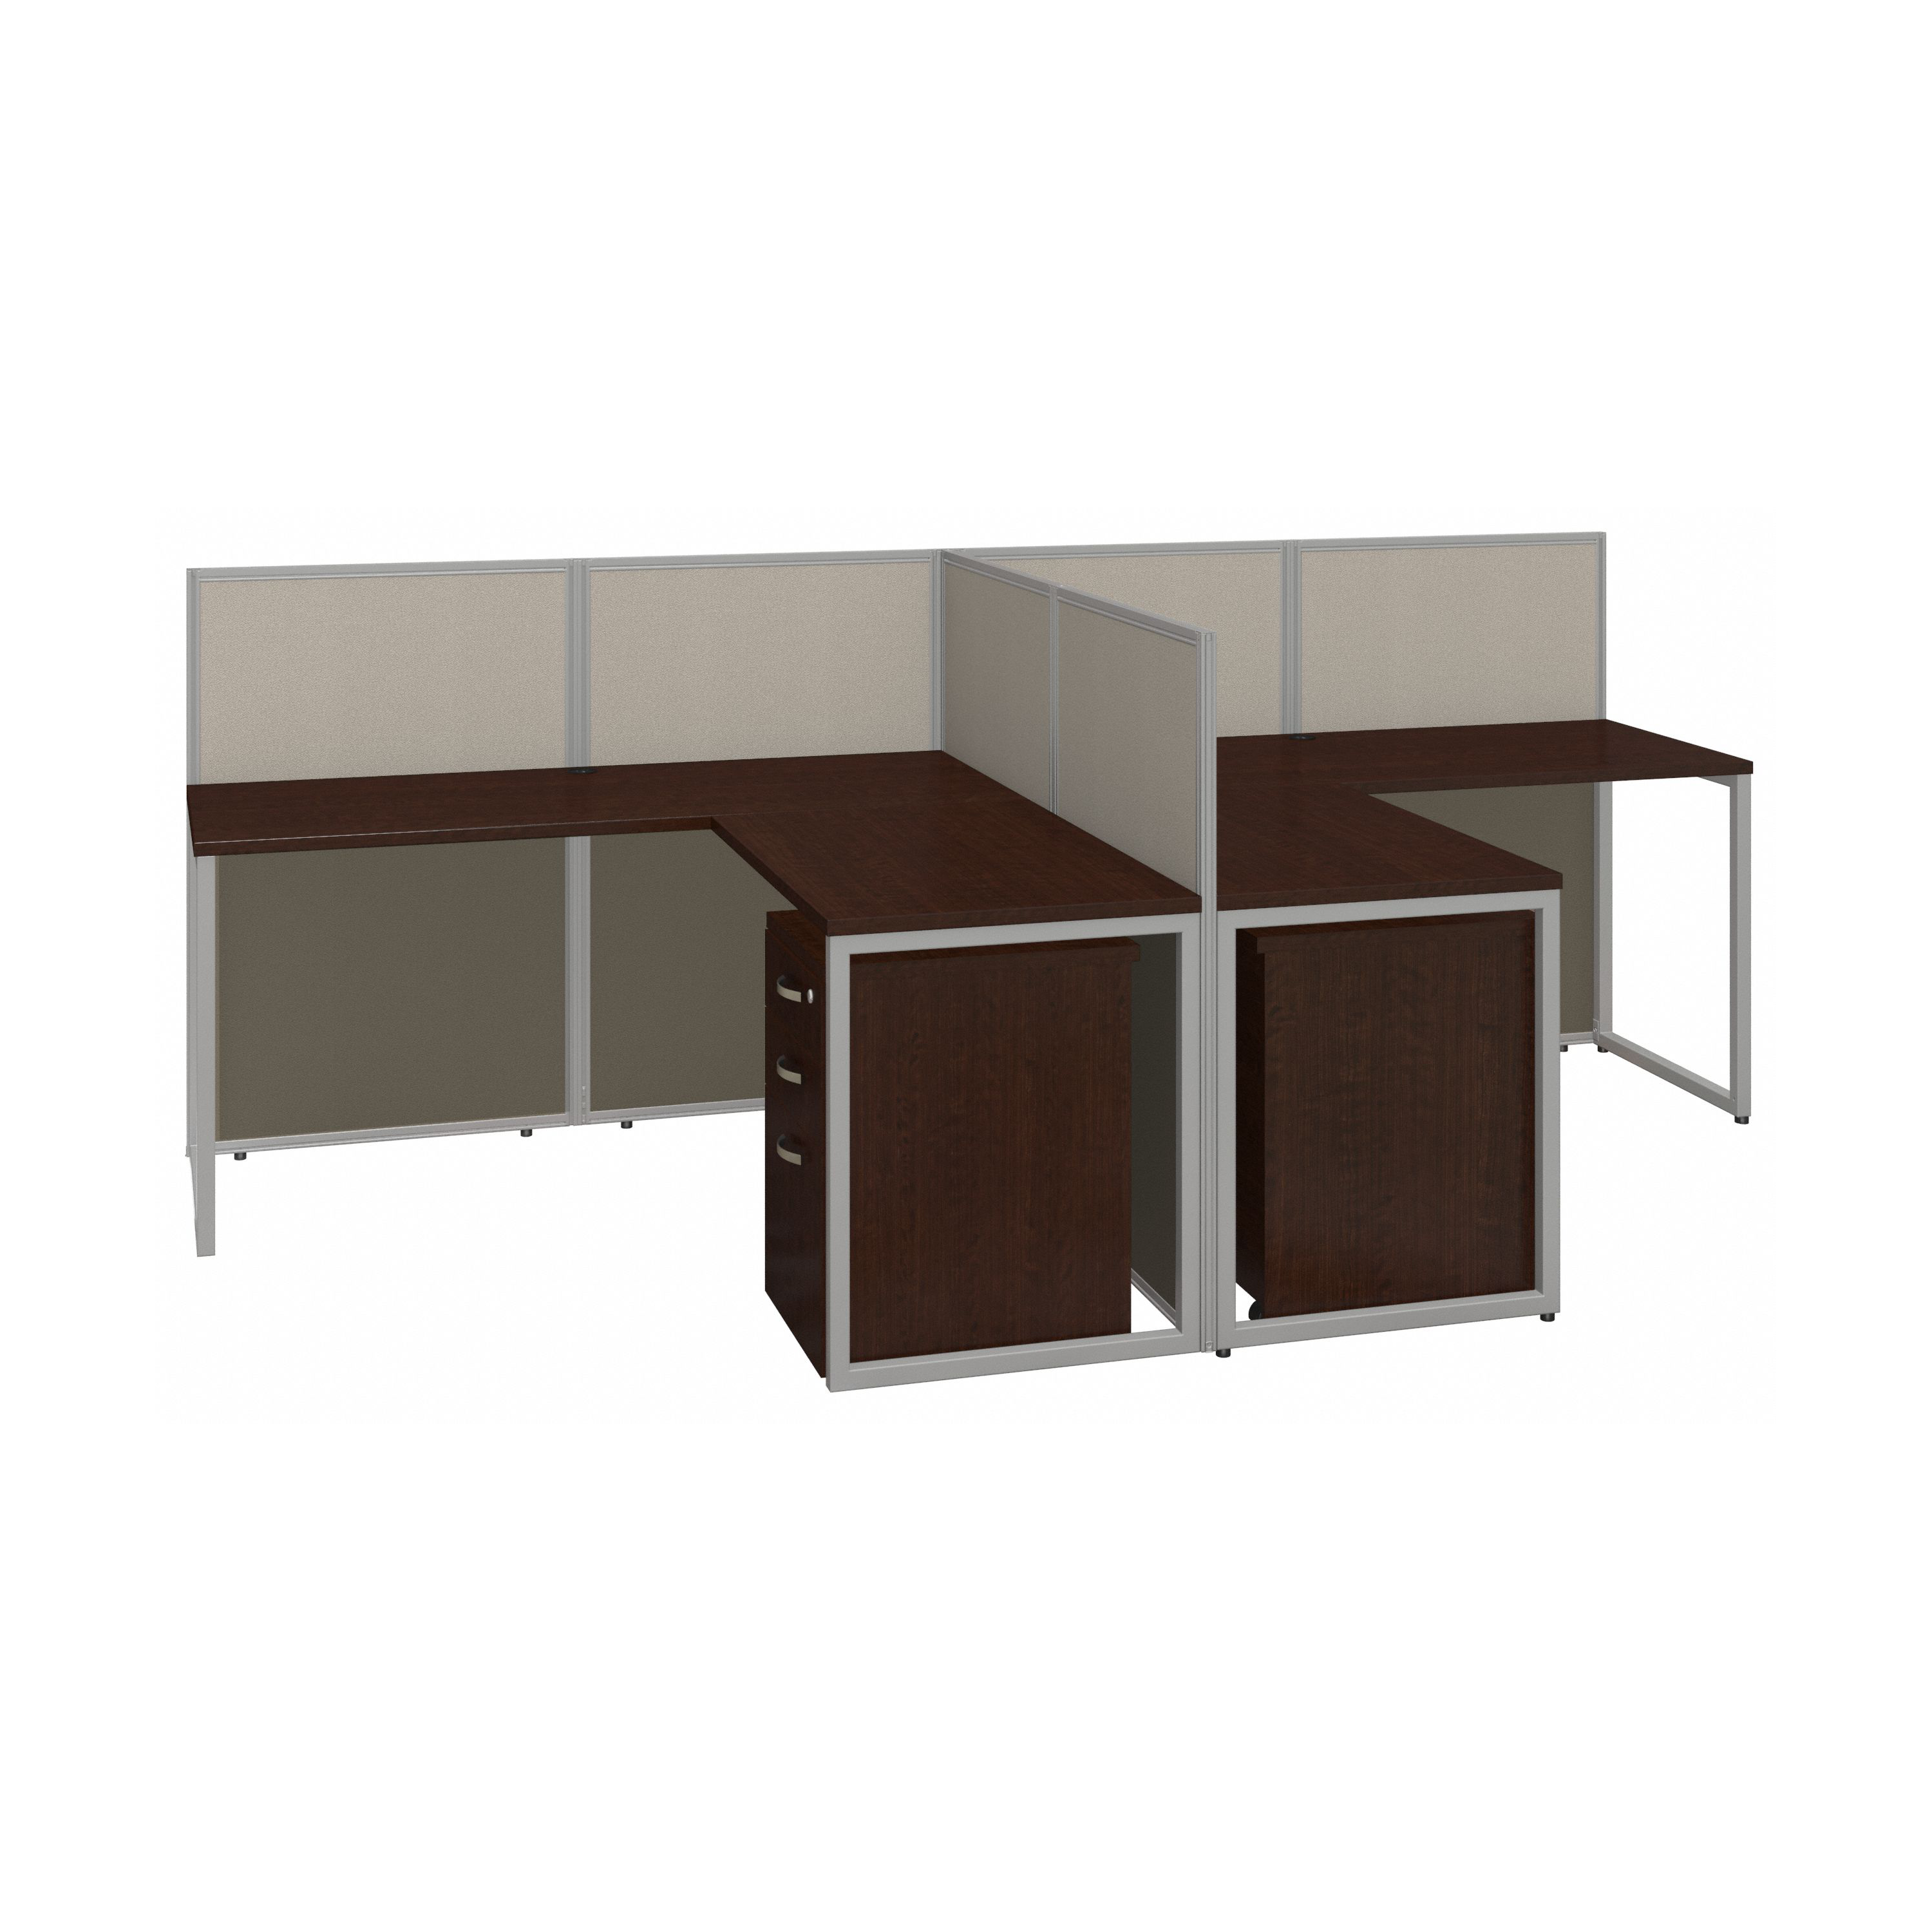 Shop Bush Business Furniture Easy Office 60W 2 Person L Shaped Cubicle Desk with Drawers and 45H Panels 02 EOD560SMR-03K #color_mocha cherry